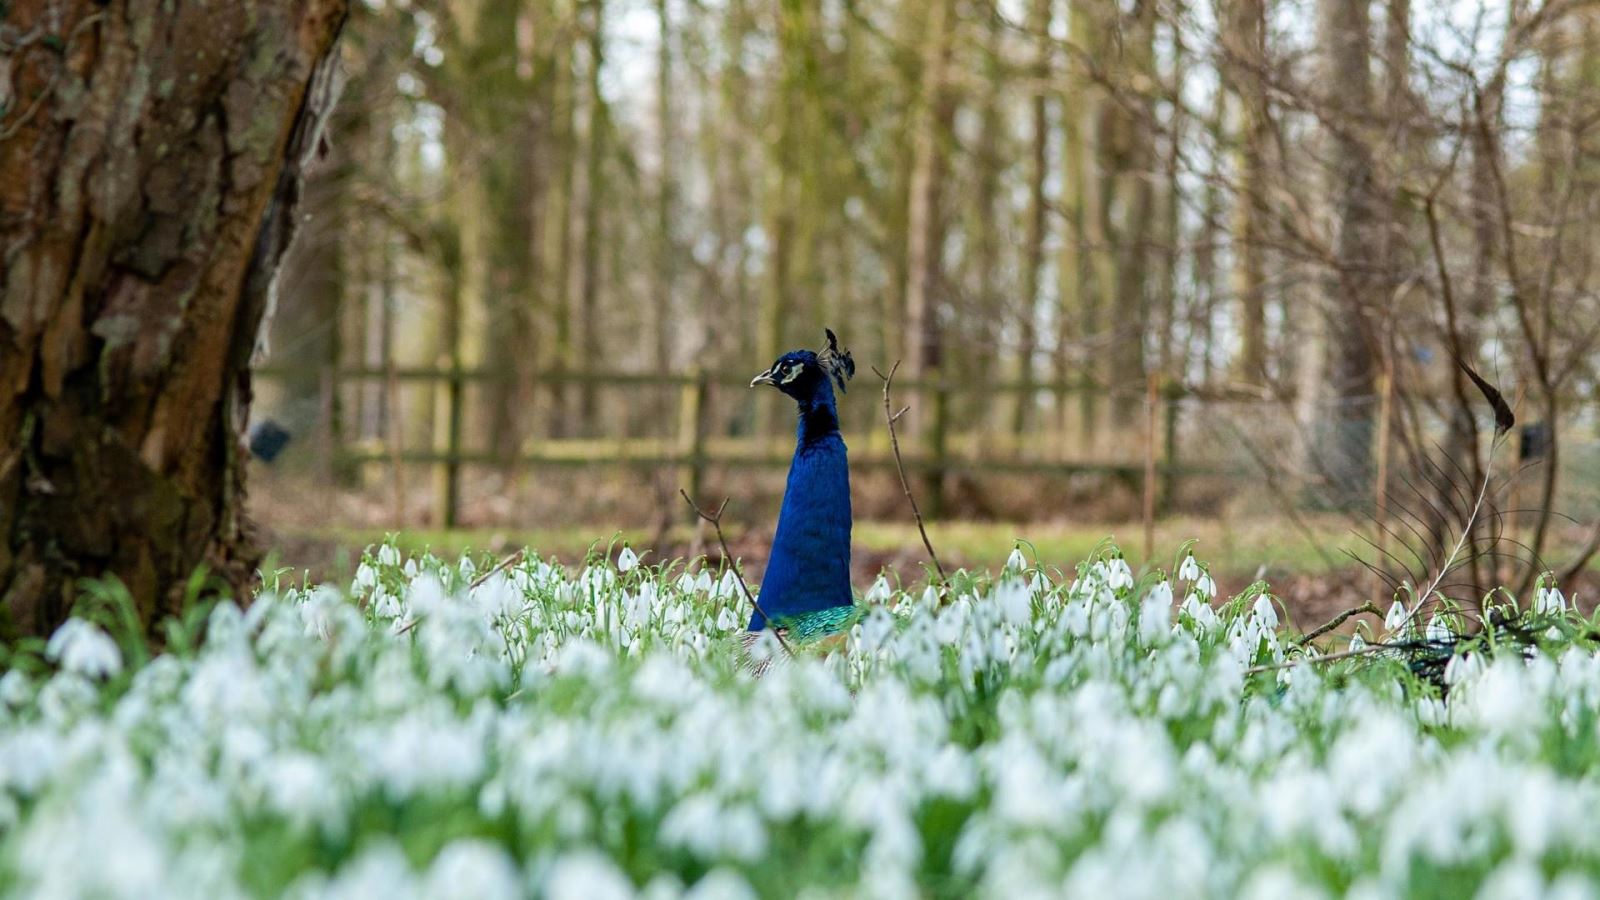 Peacock in a field of snowdrops at Markshall, Essex